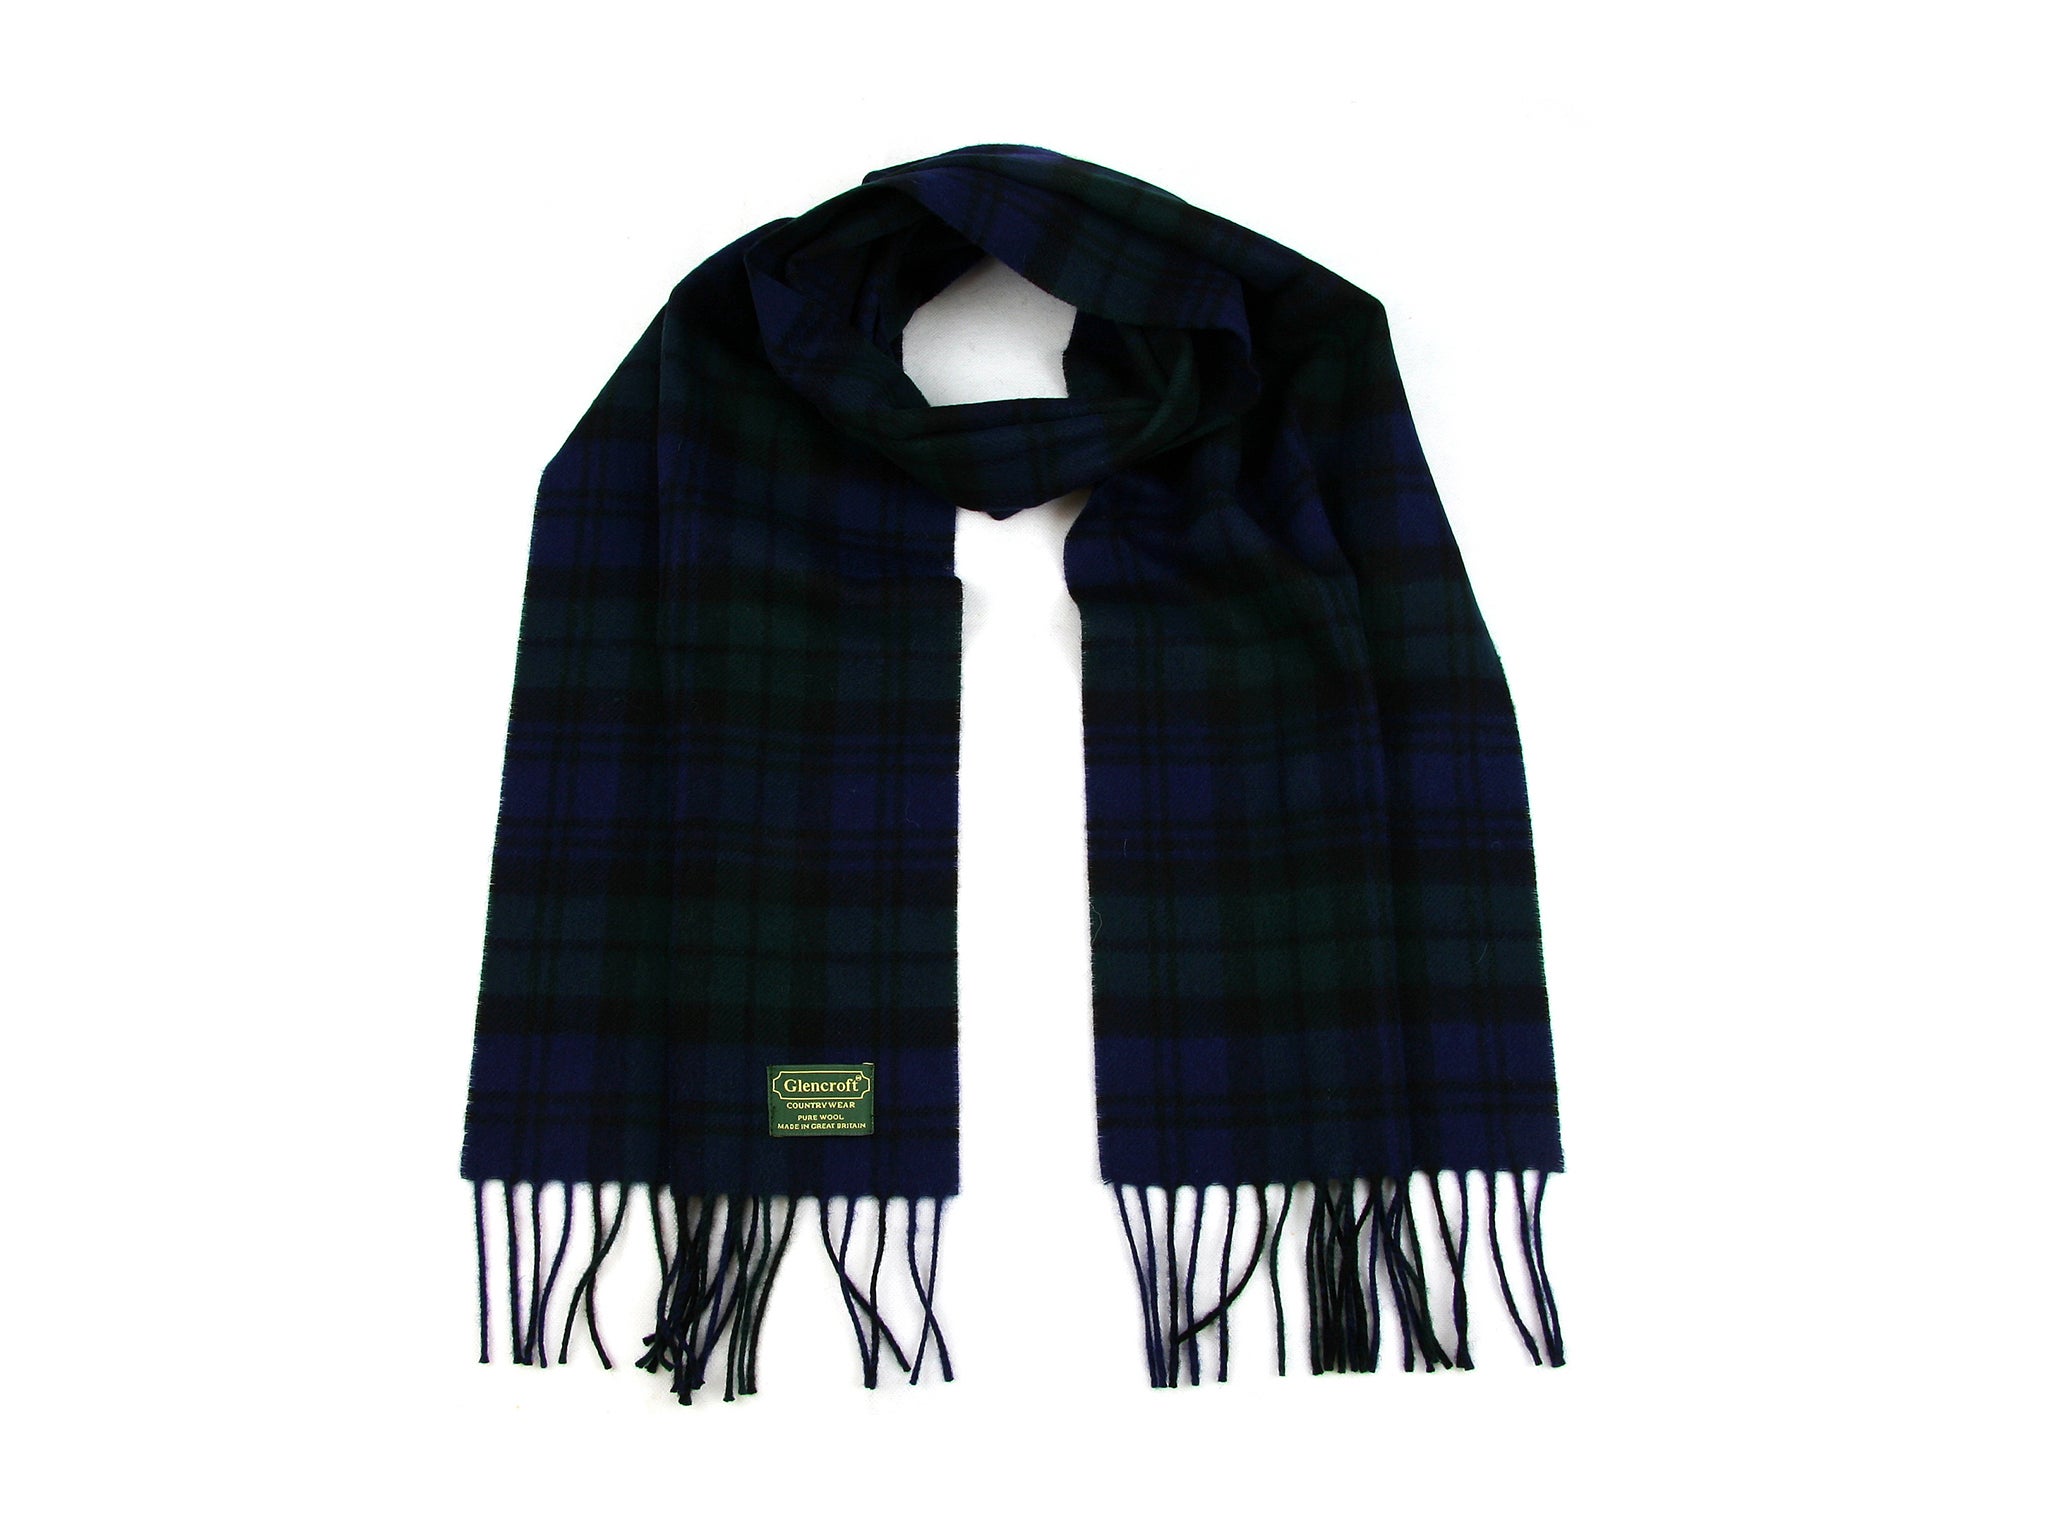 Men's and Women's Unisex Plaid Cashmere Feel Scarf Oversized Scarves Softer Than Cashmere Features Size 79 X 21.5 Soft Midi Style Scarf